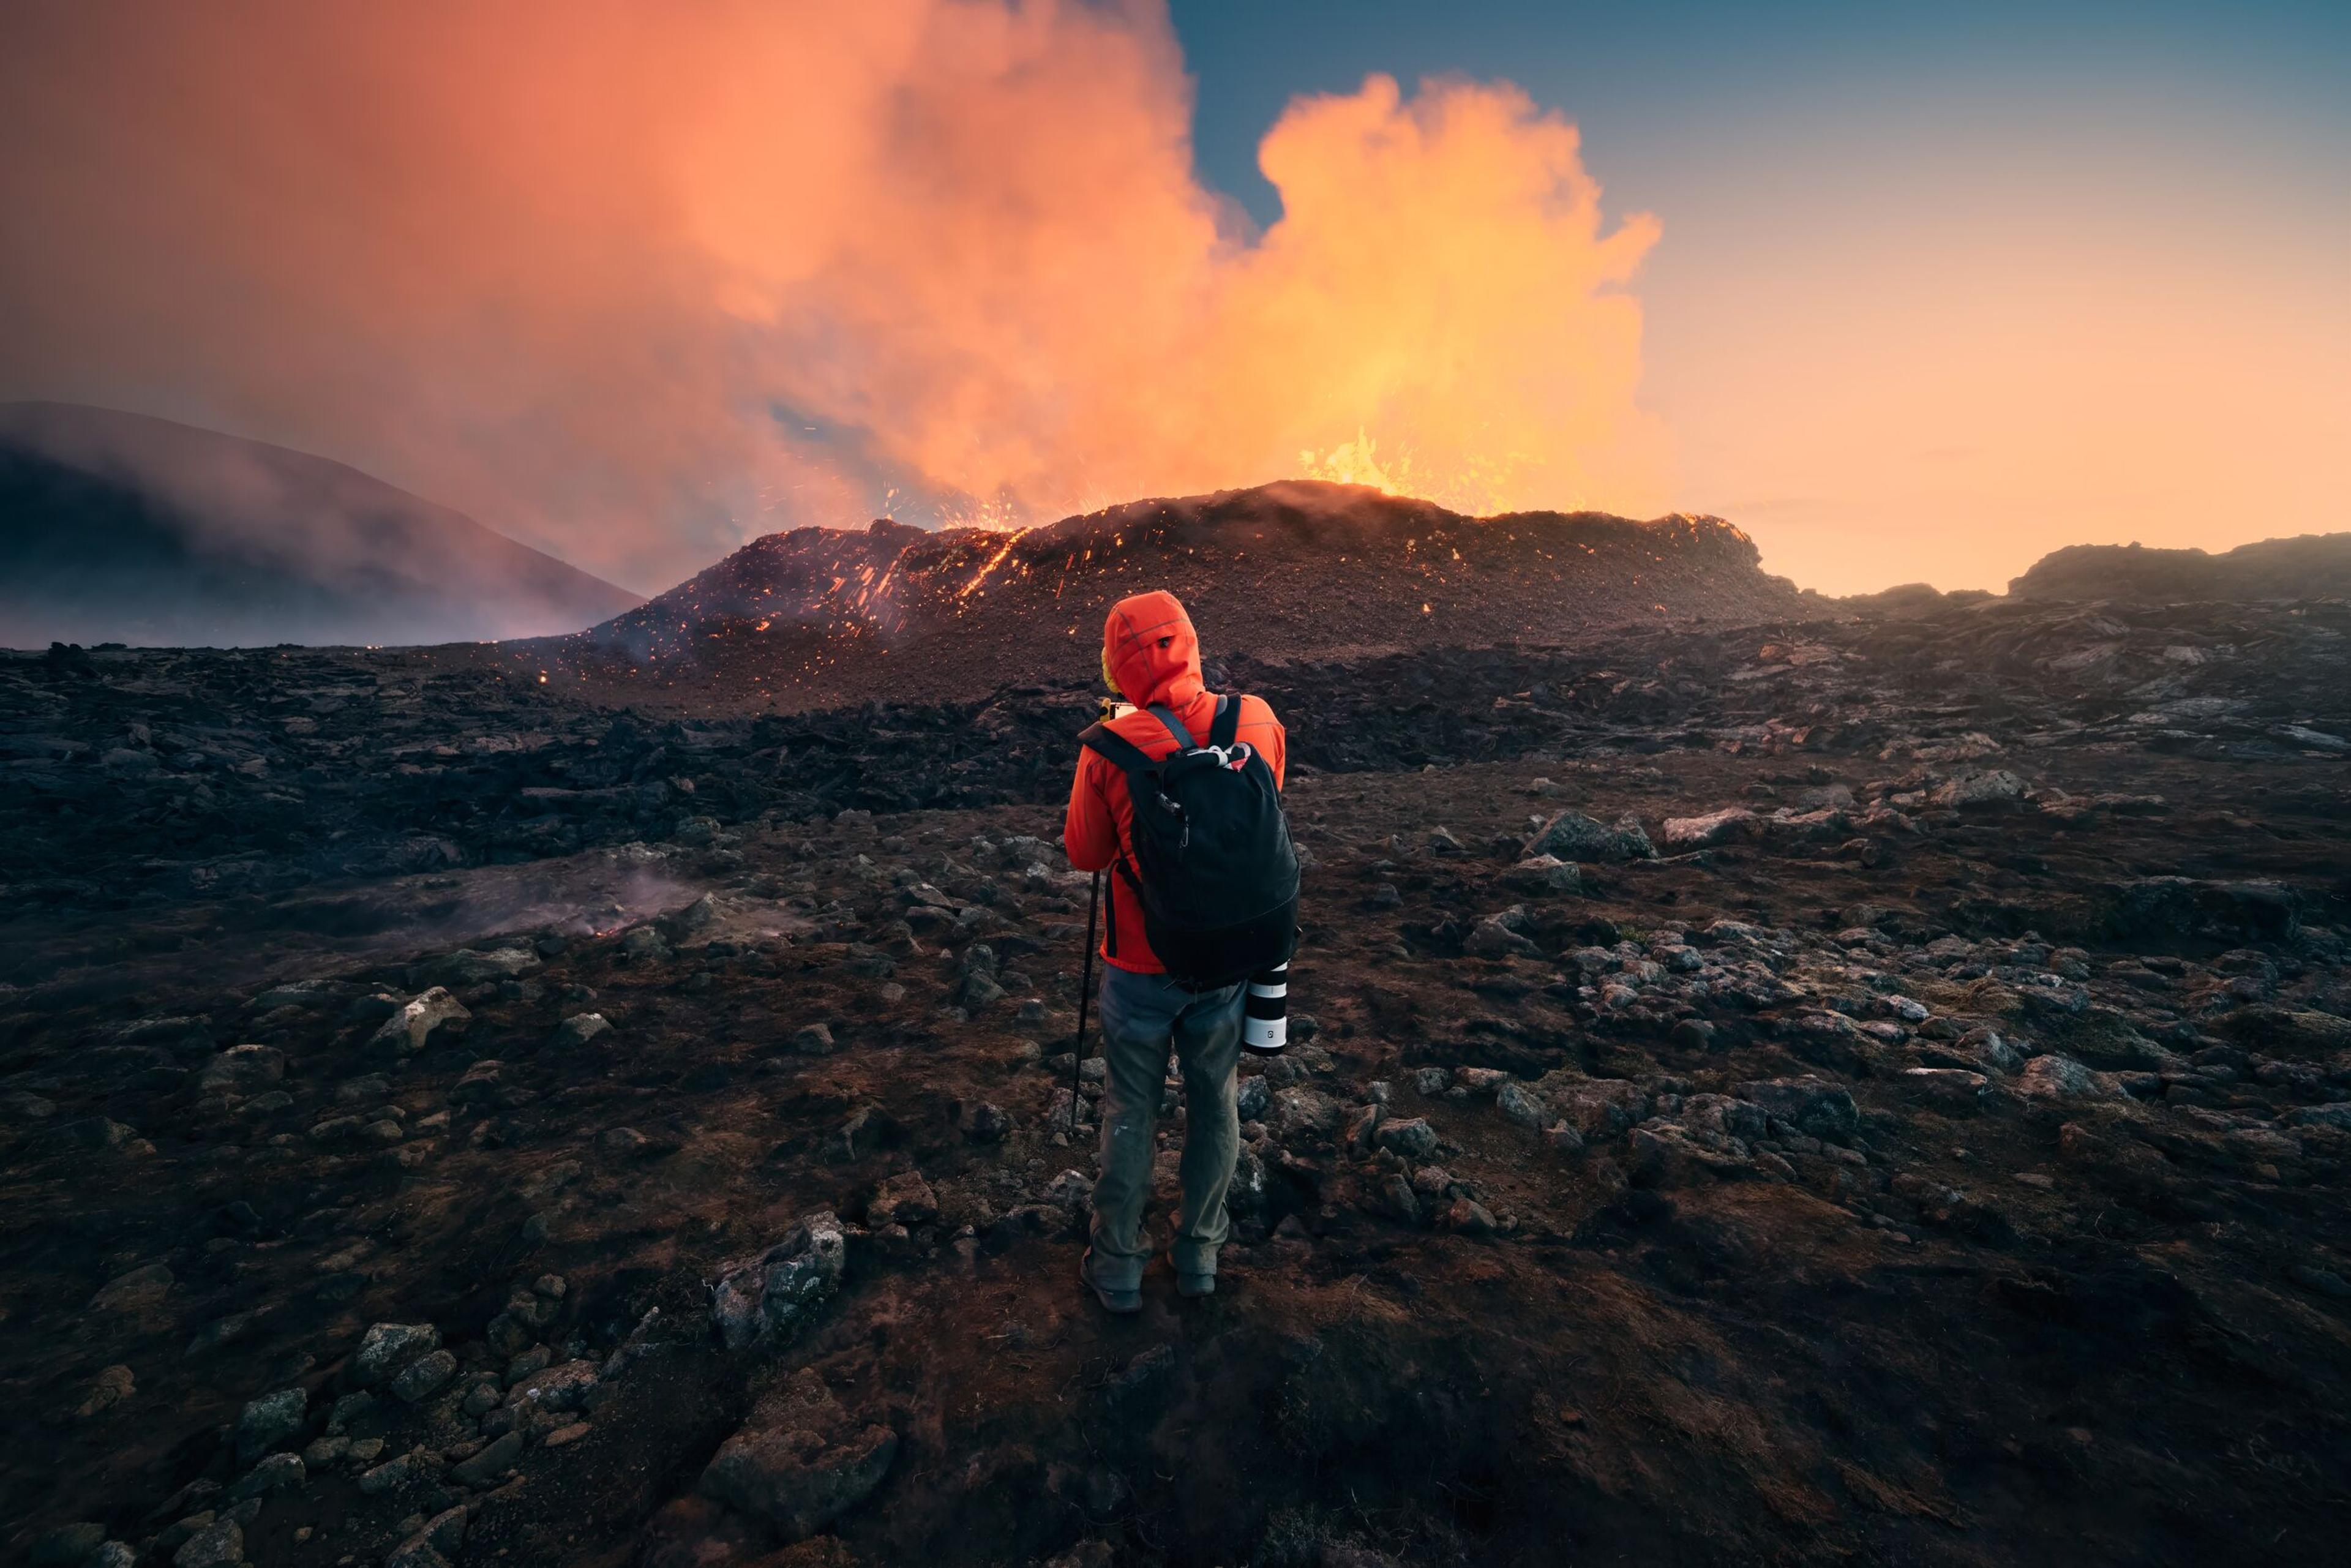 A person in a red jacket stands at a safe distance, witnessing the raw and mesmerizing power of an active volcanic eruption in Iceland, with the twilight sky glowing from the lava's reflection